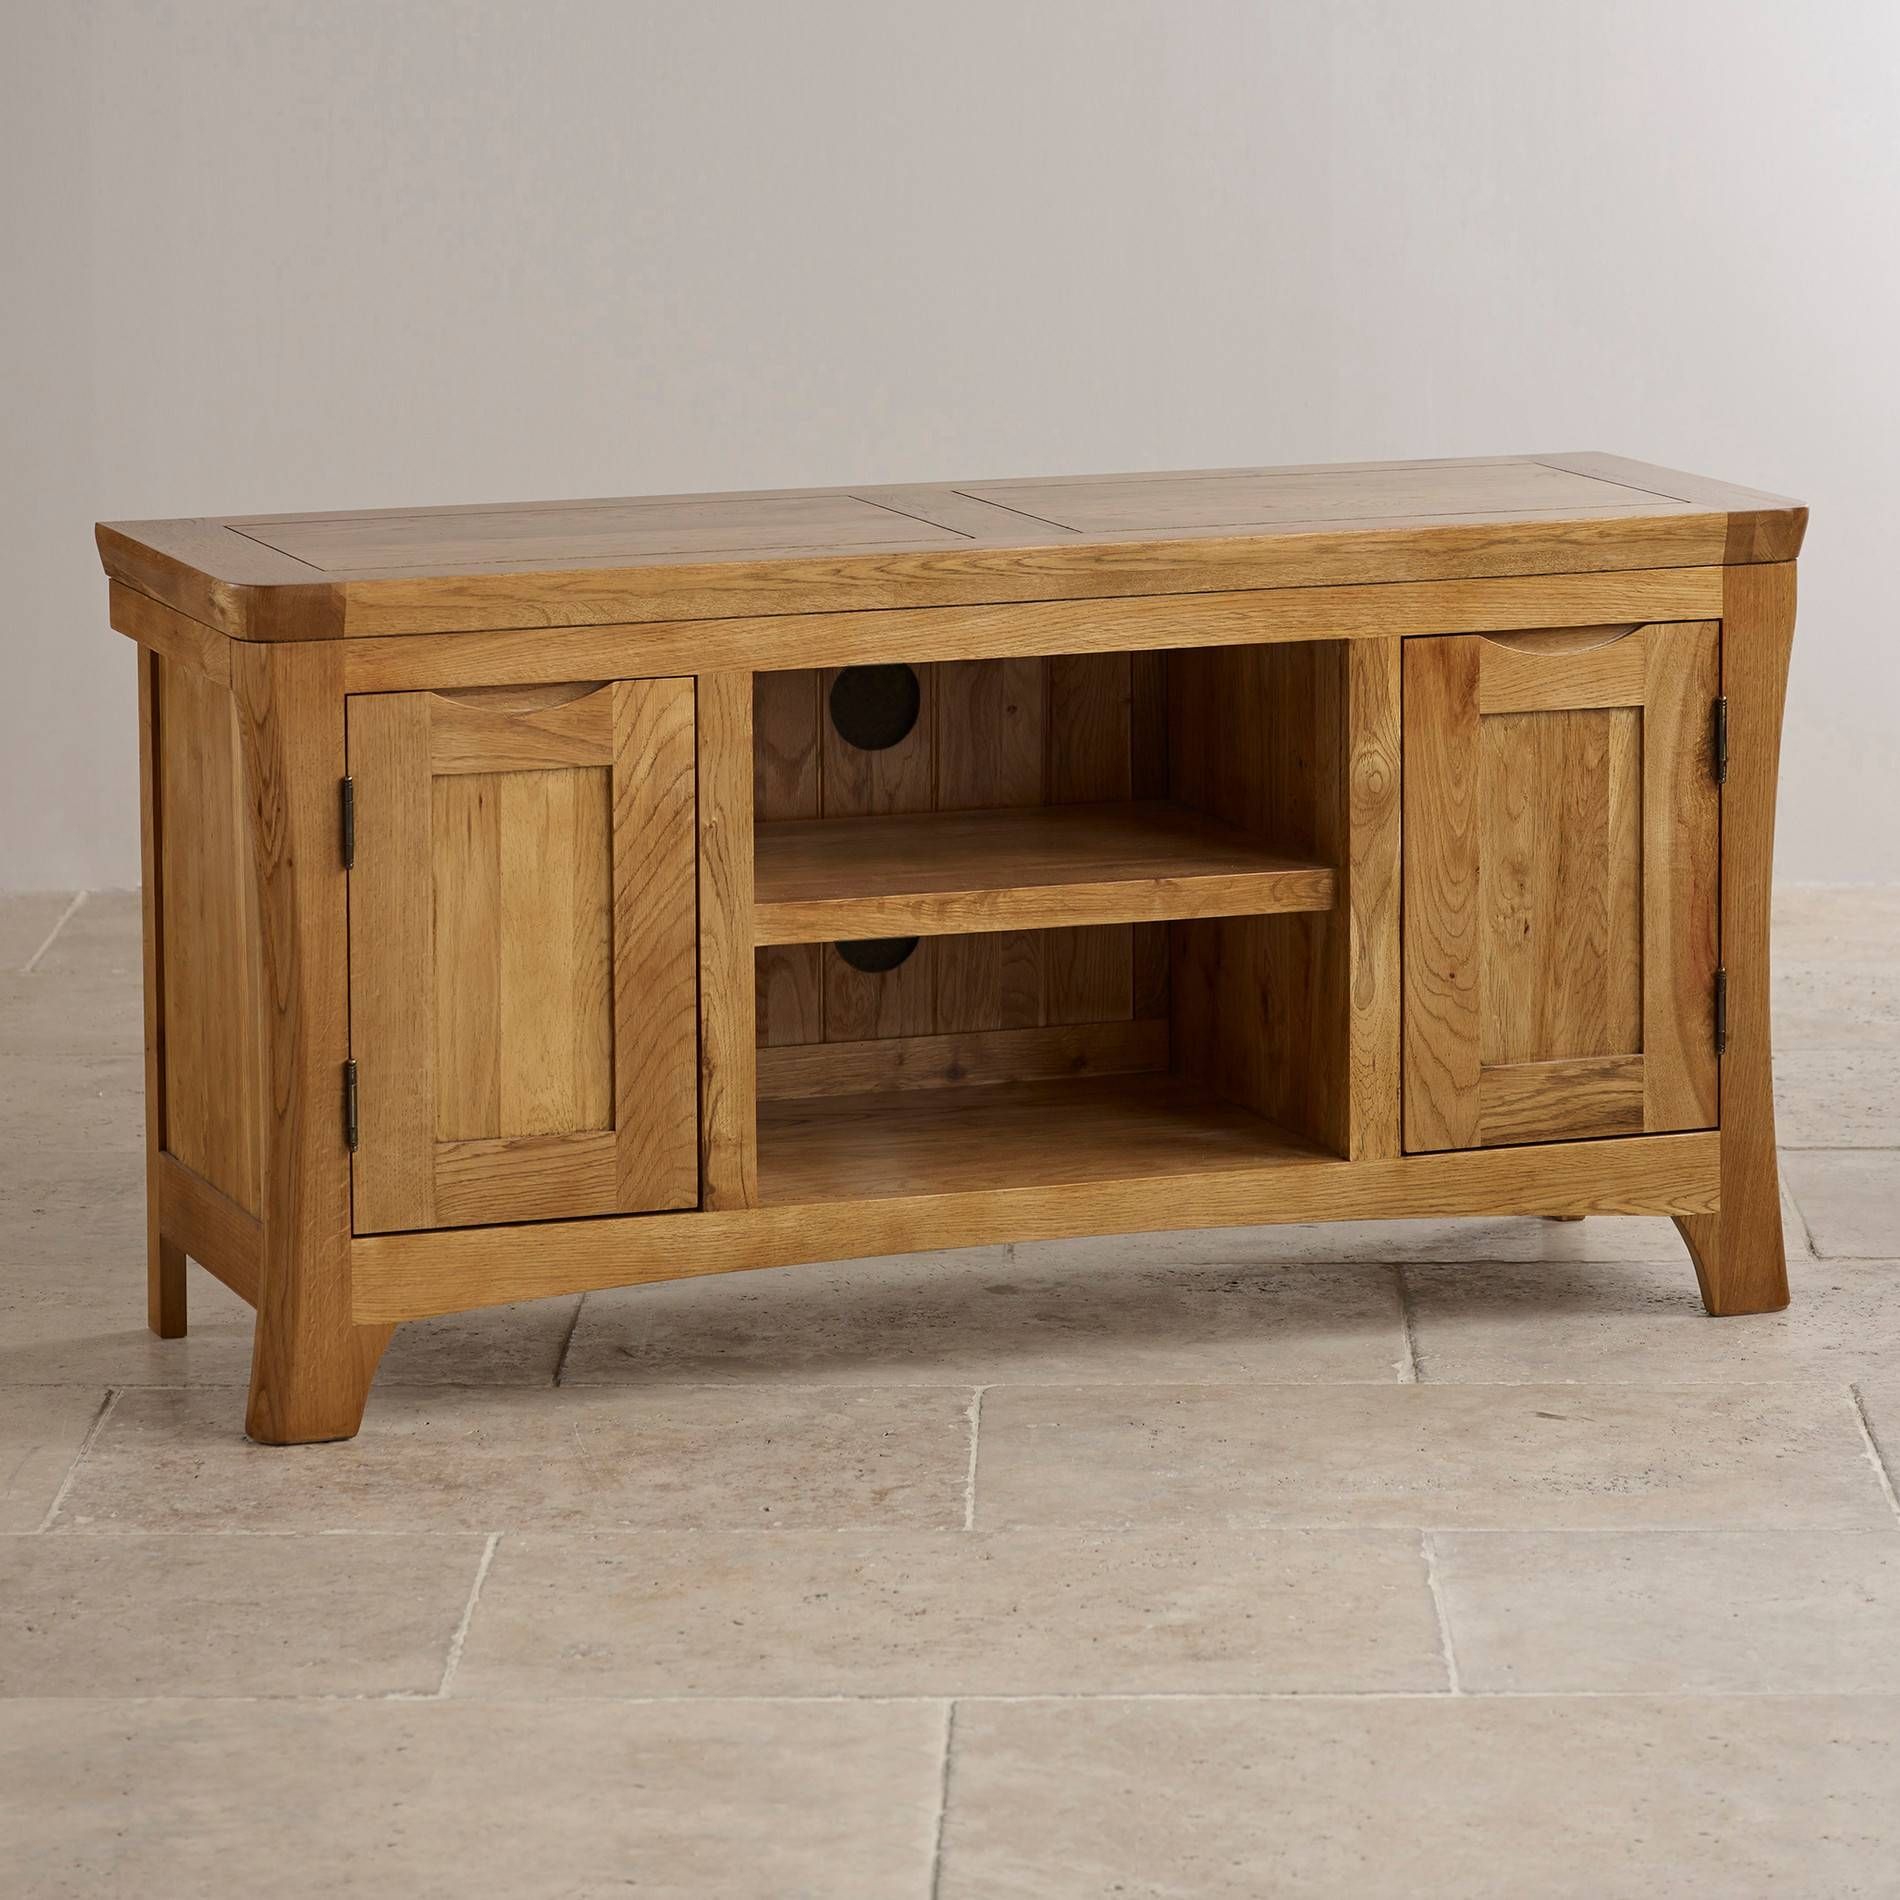 Orrick Wide Tv Cabinet In Rustic Solid Oak | Oak Furniture Land Throughout Rustic Wood Tv Cabinets (View 6 of 15)